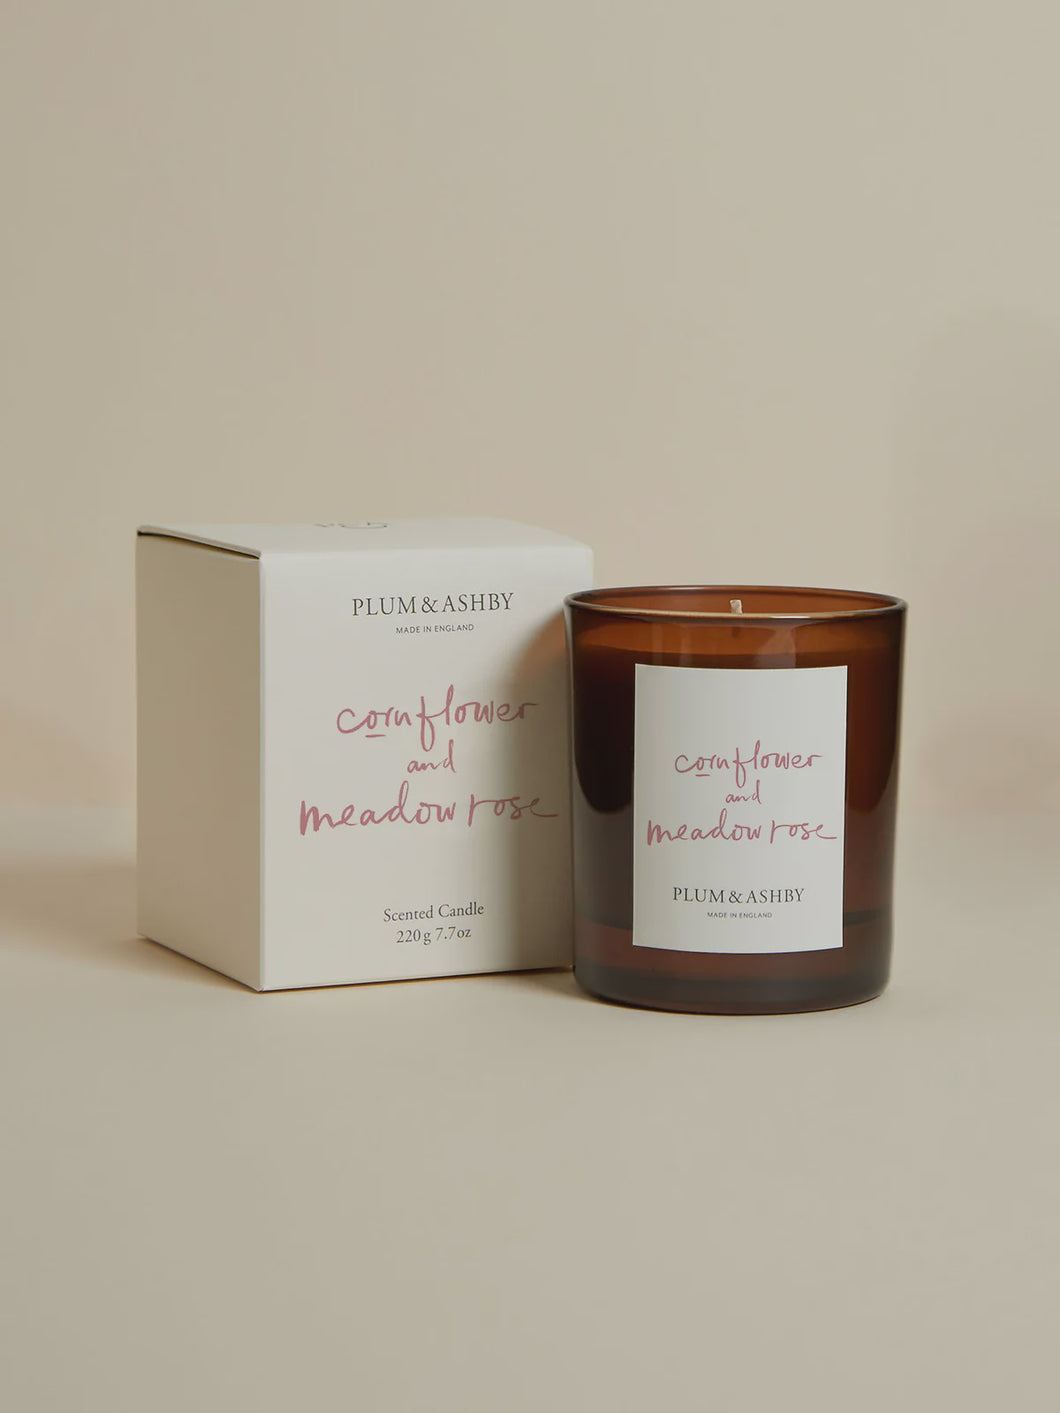 Cornflower and Meadow Rose Candle